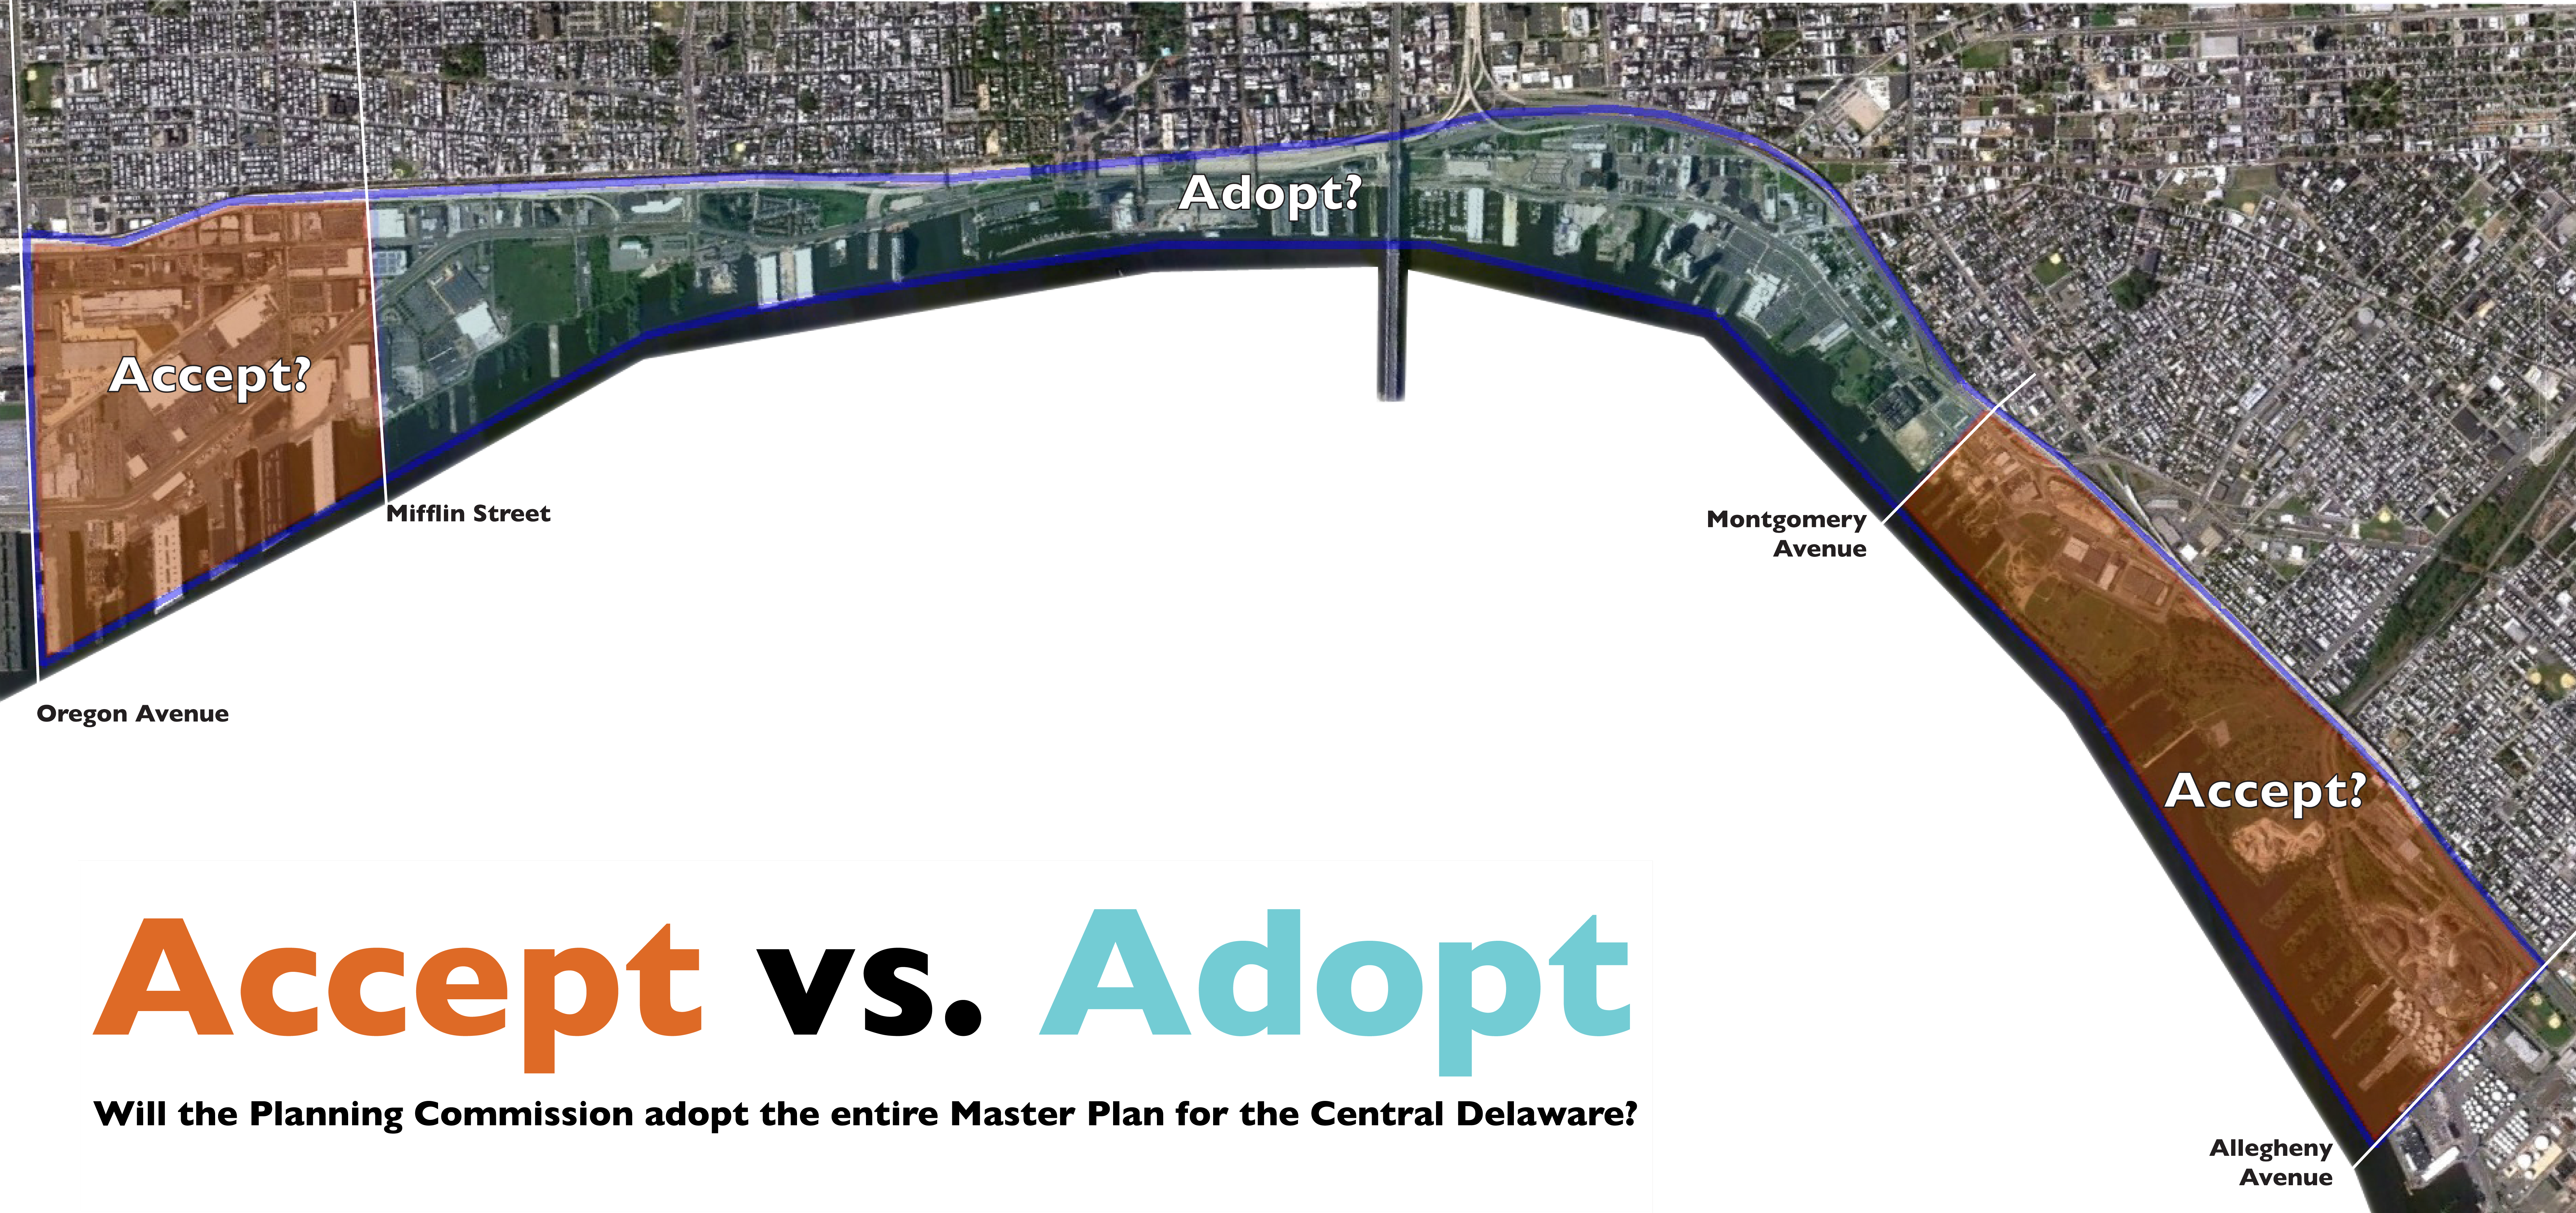 Just a piece of work? City Planning still deciding whether to endorse adoption of entire waterfront plan